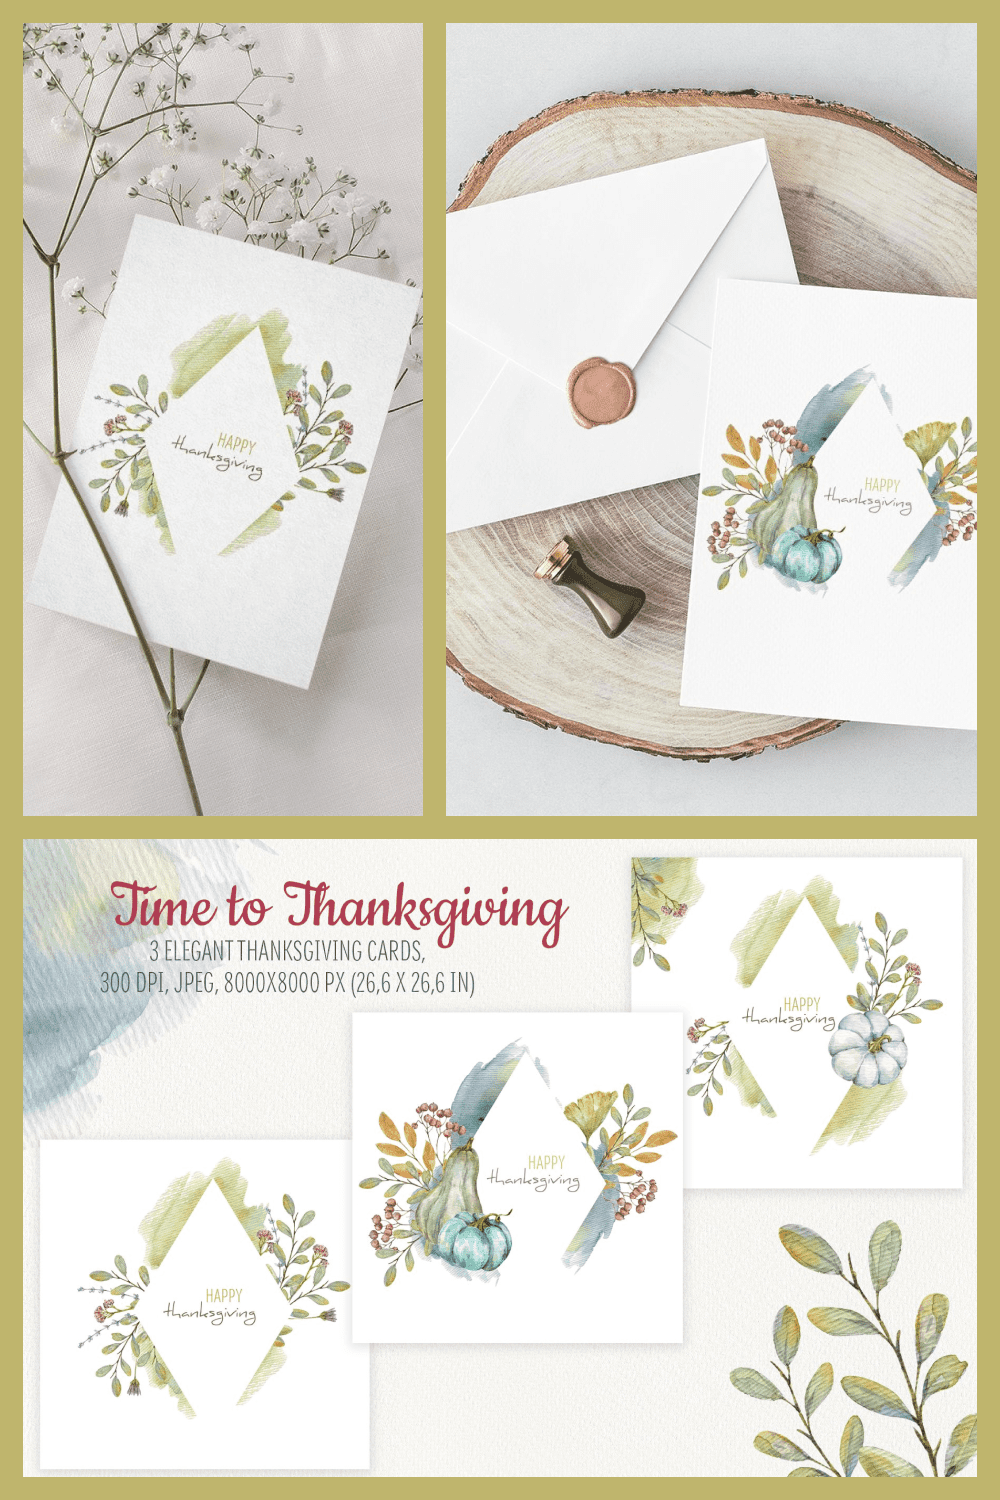 Time to thanksgiving. Watercolor thanksgiving cards.